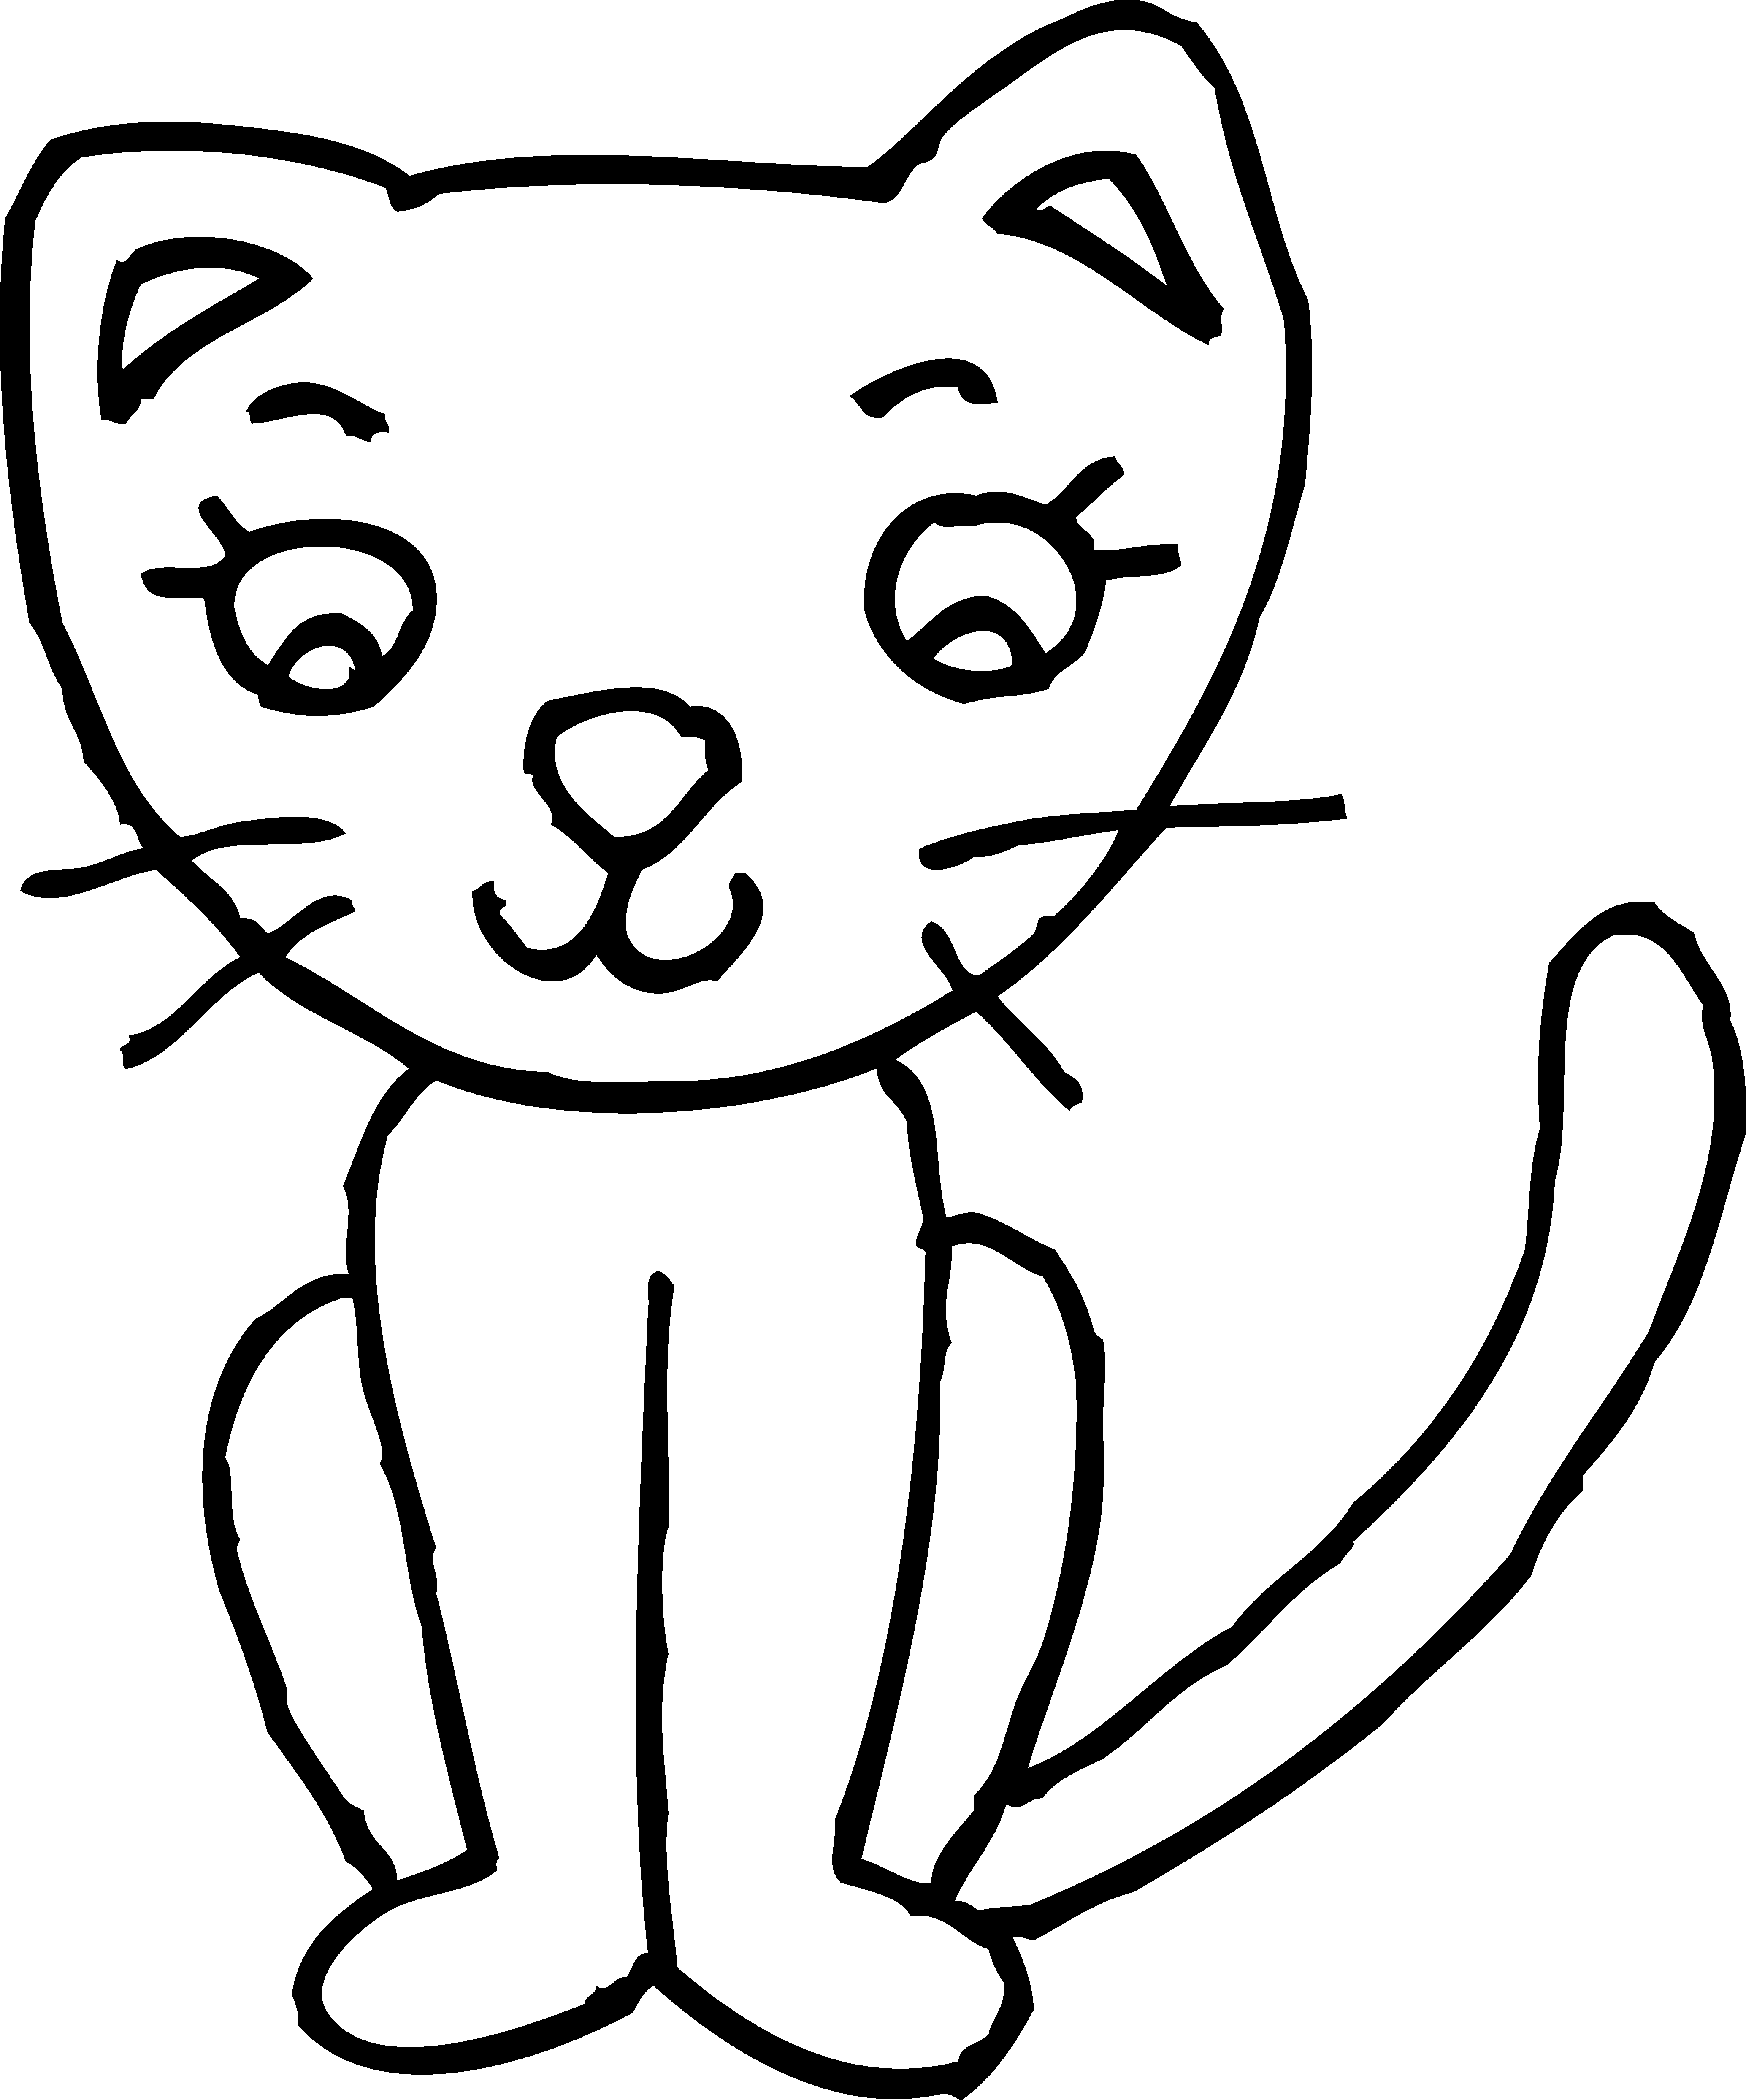 Cat Clip Art Black And White | Clipart Panda - Free Clipart Images